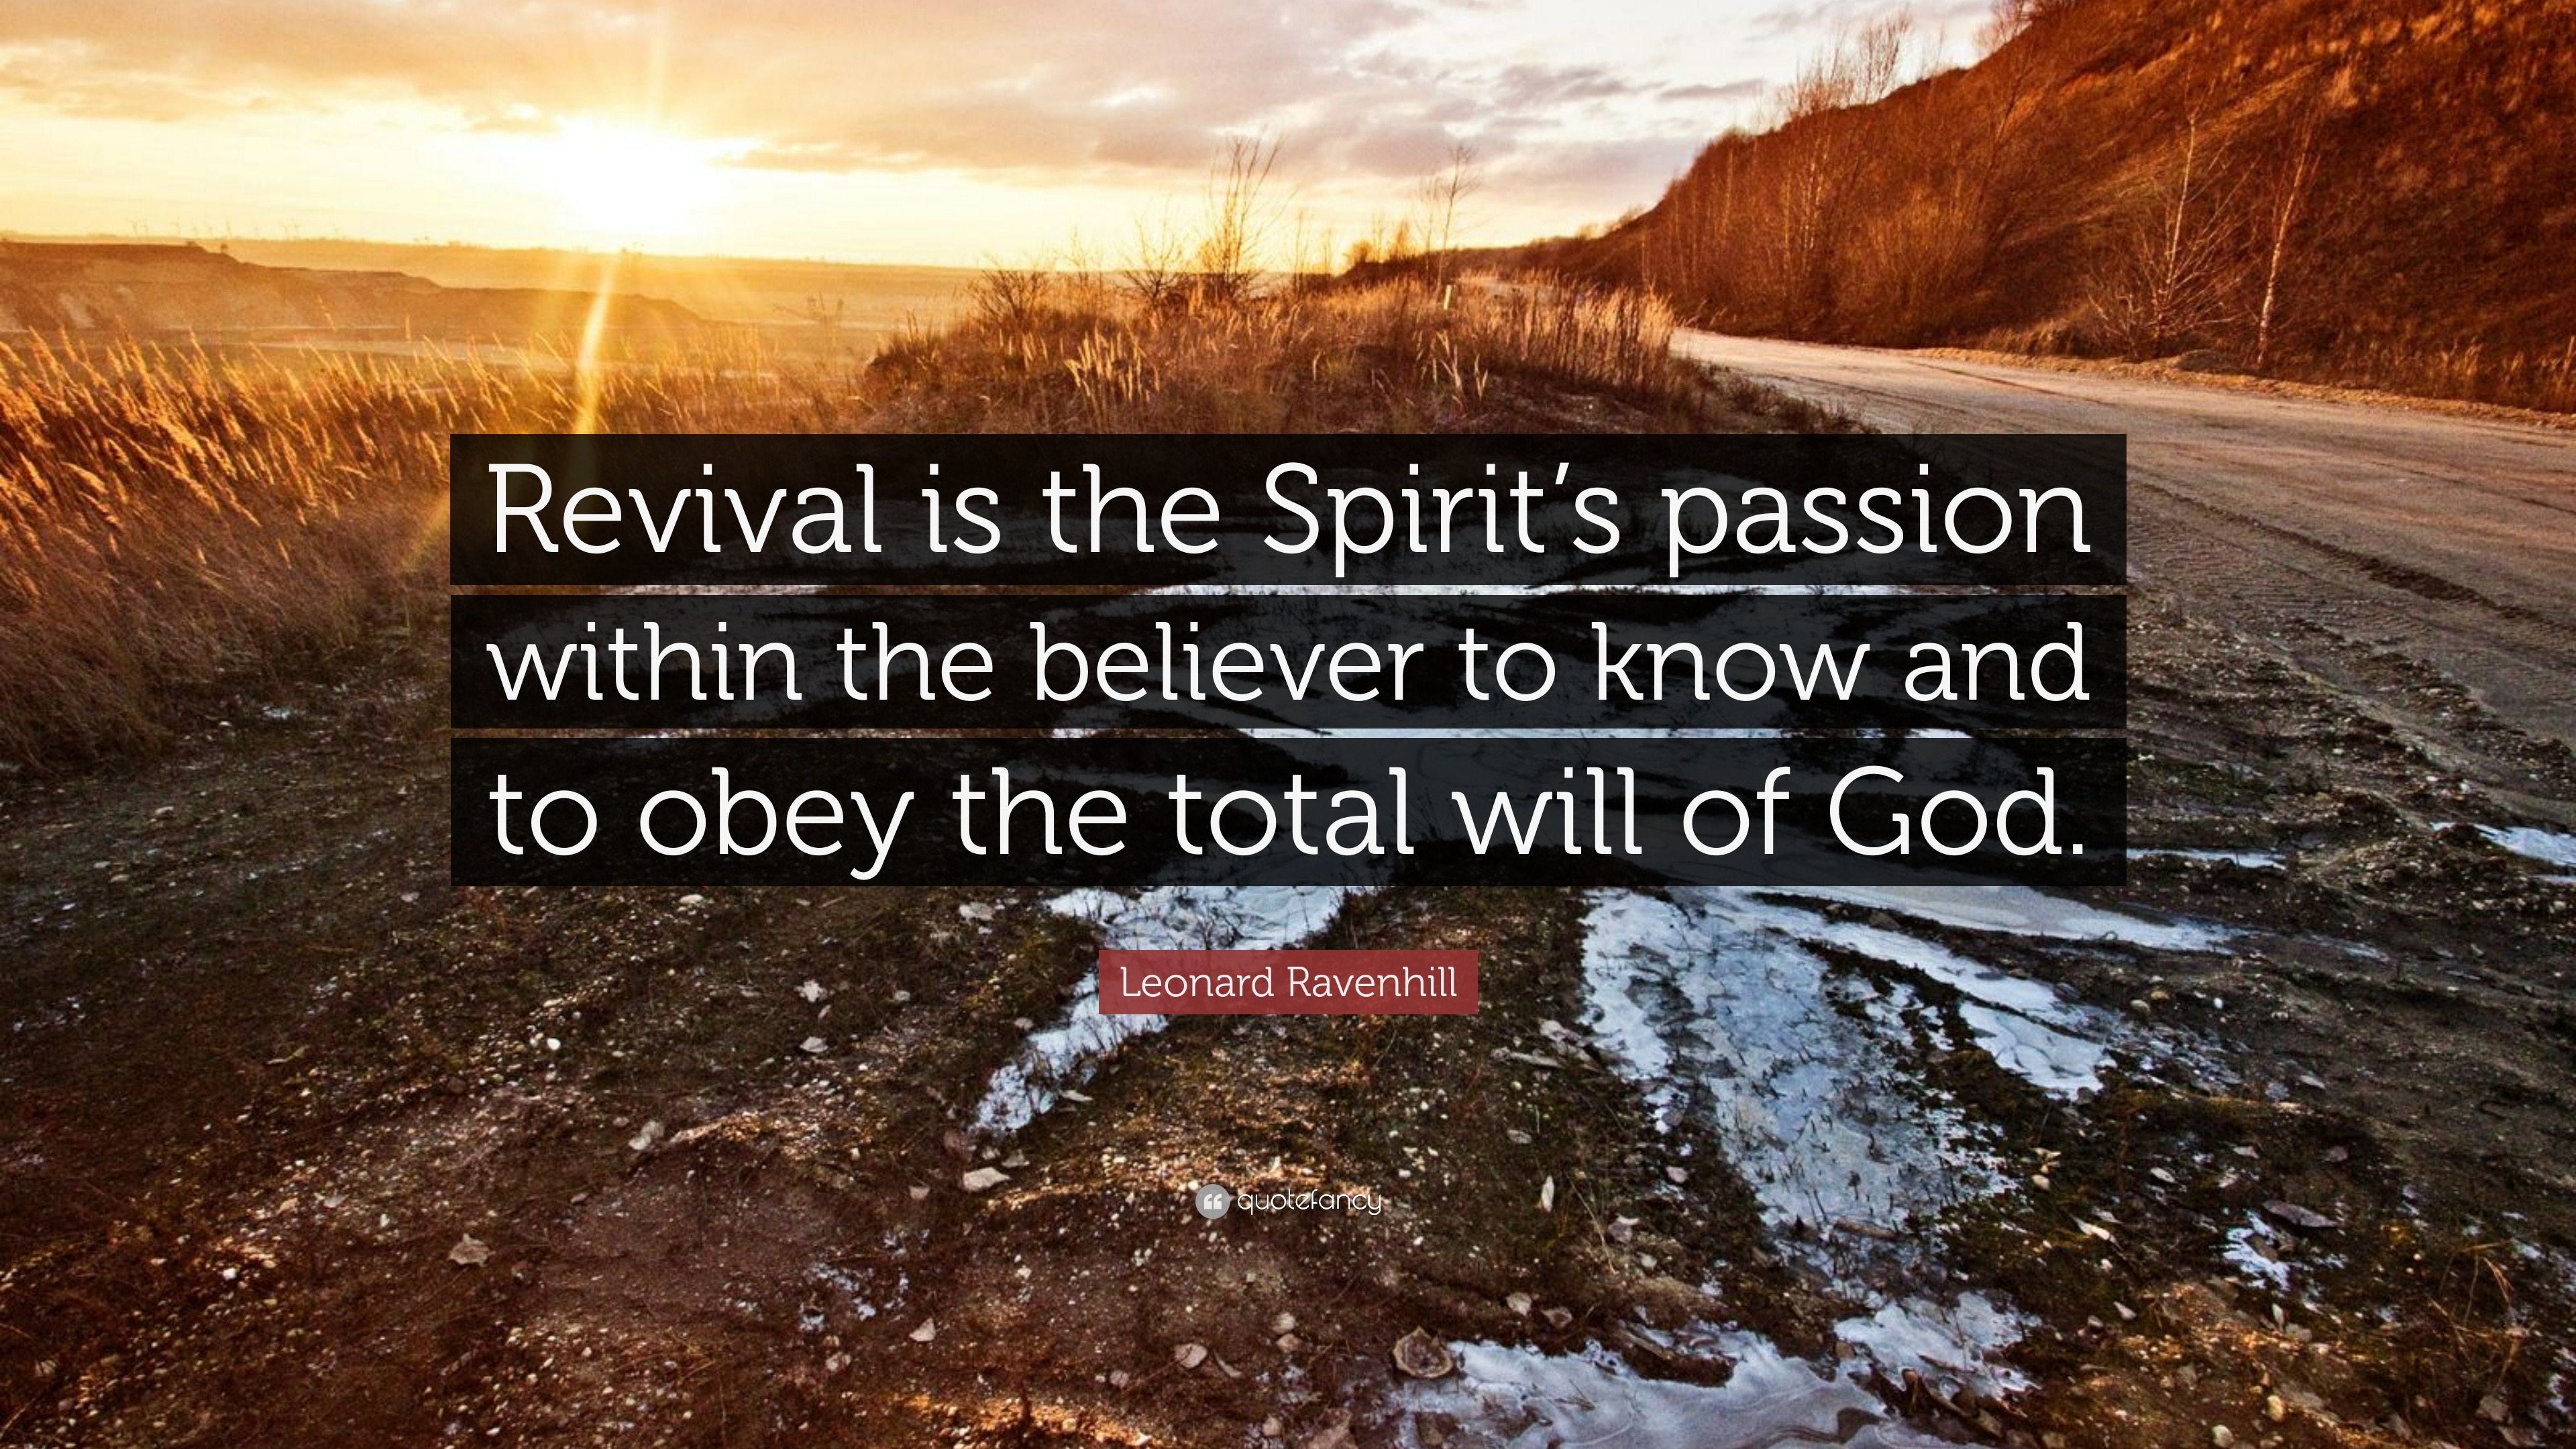 Leonard Ravenhill Quote “Revival is the Spirit’s passion within the